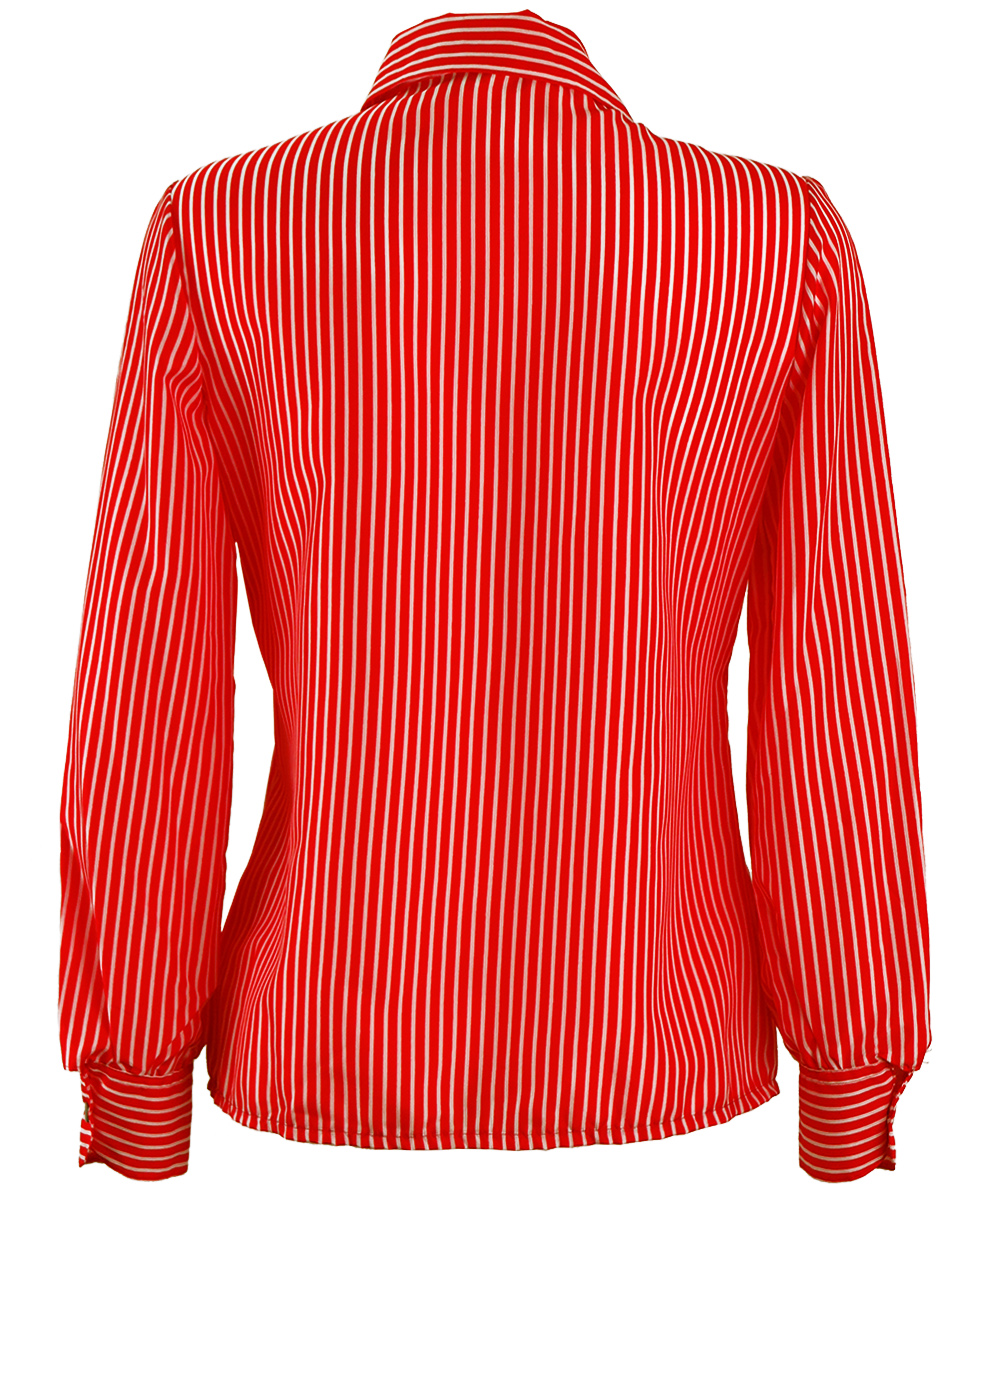 Vintage 70's Red and White Pinstripe Blouse - M/L | Reign Vintage